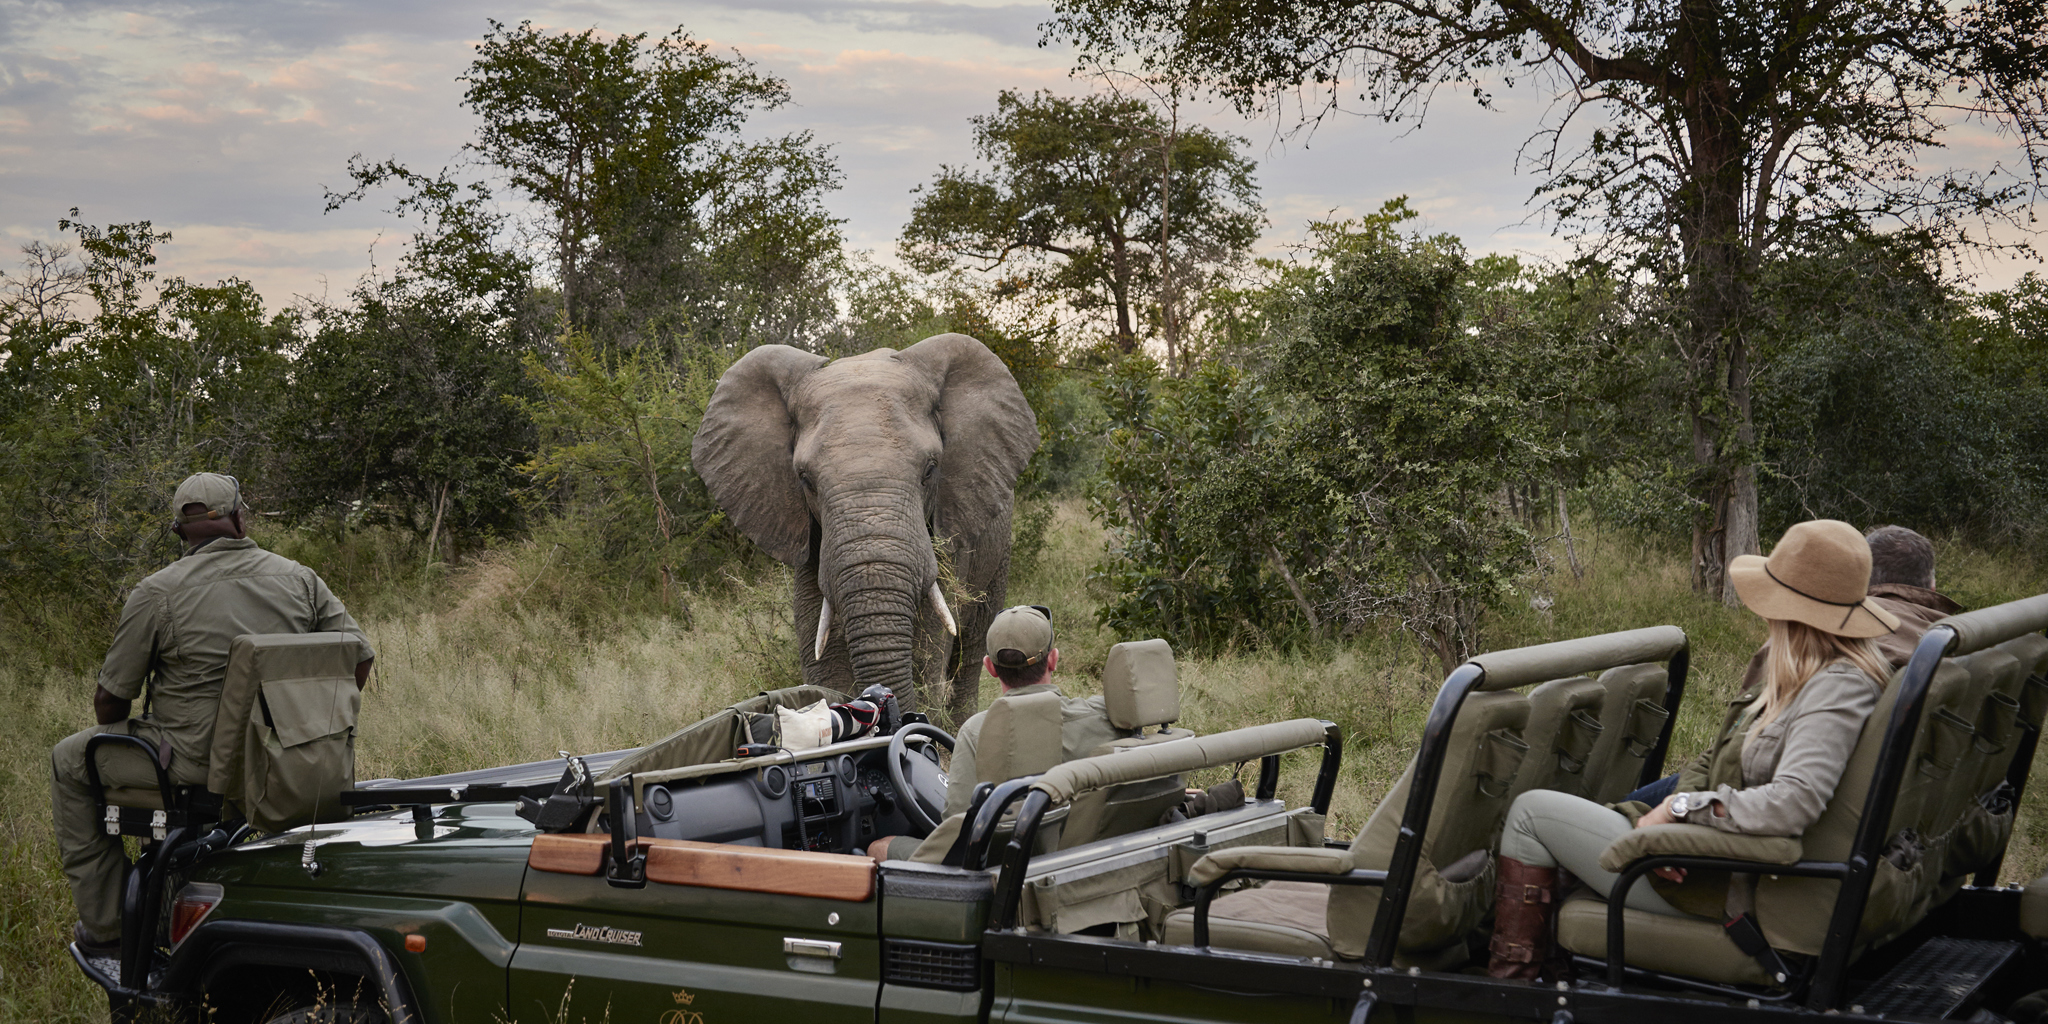 rm experience game drive elephant